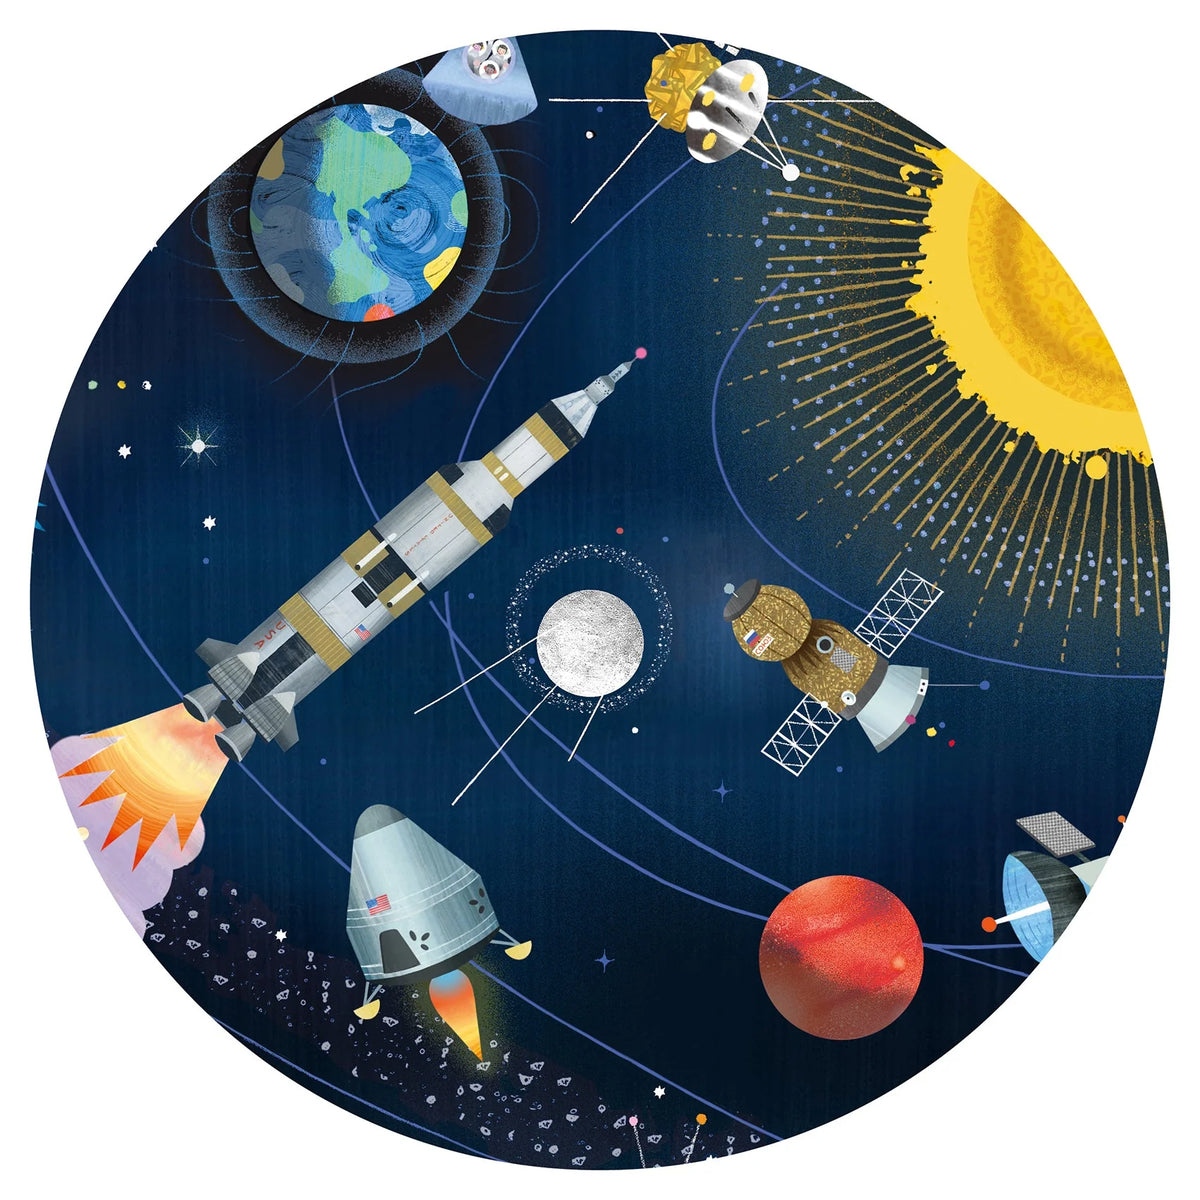 Space Observation Puzzle